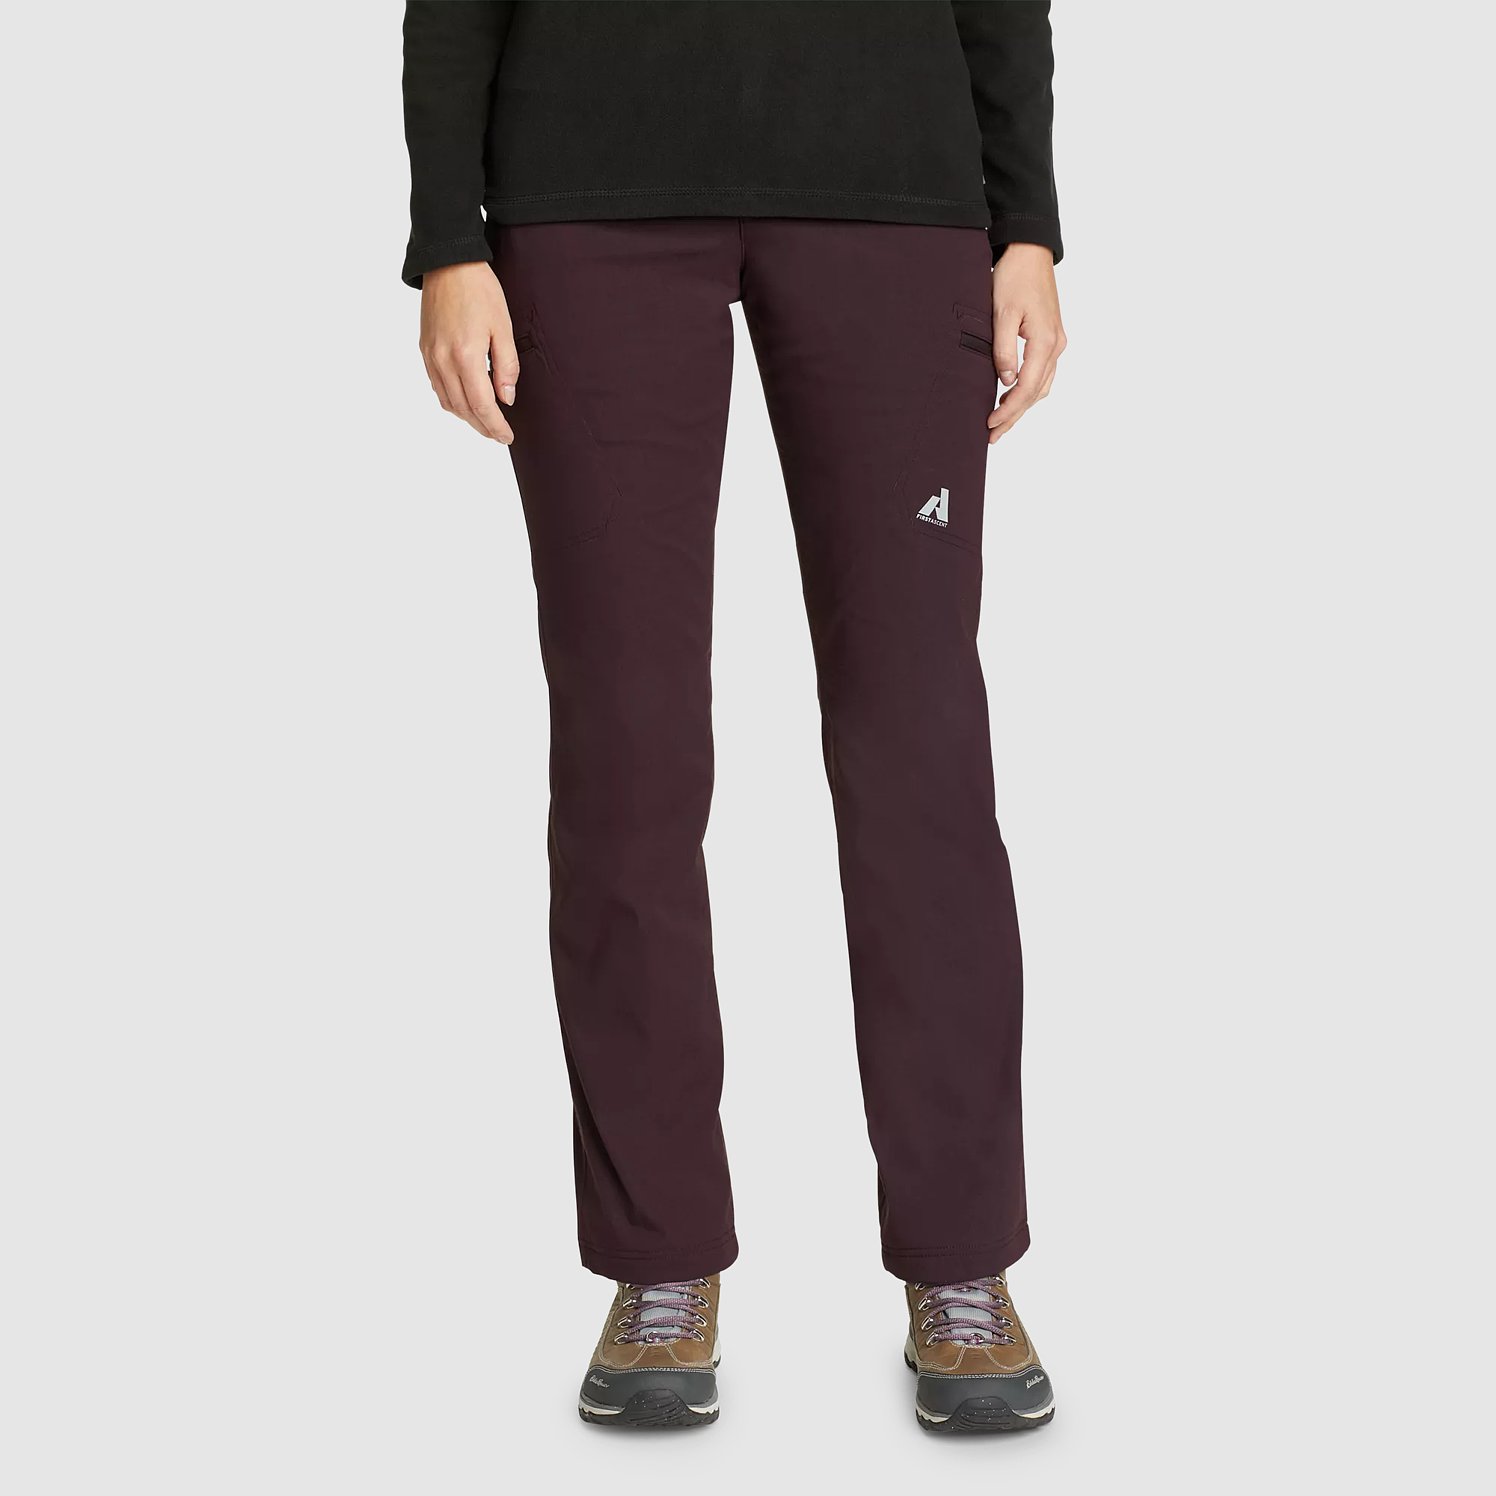 Eddie Bauer Green Athletic Pants for Women